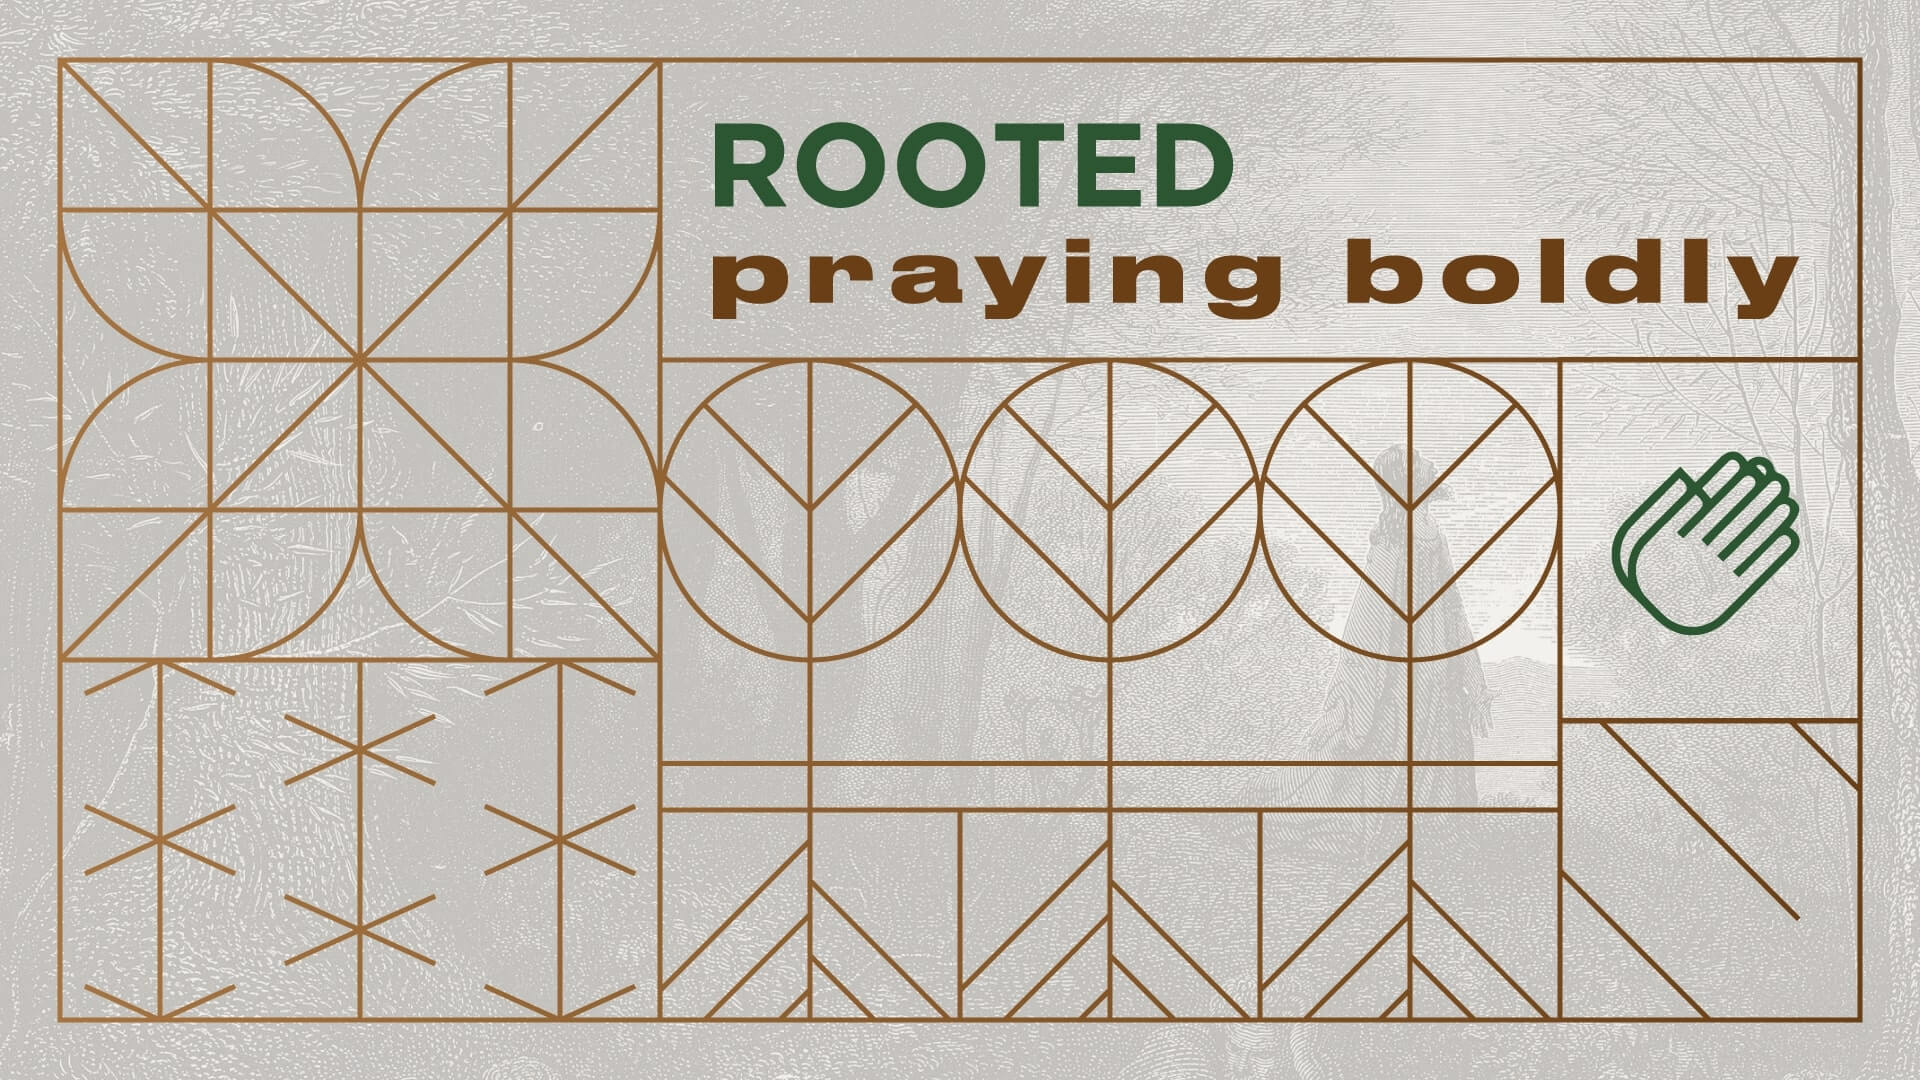 11:00 – Rooted – Bold Devotion